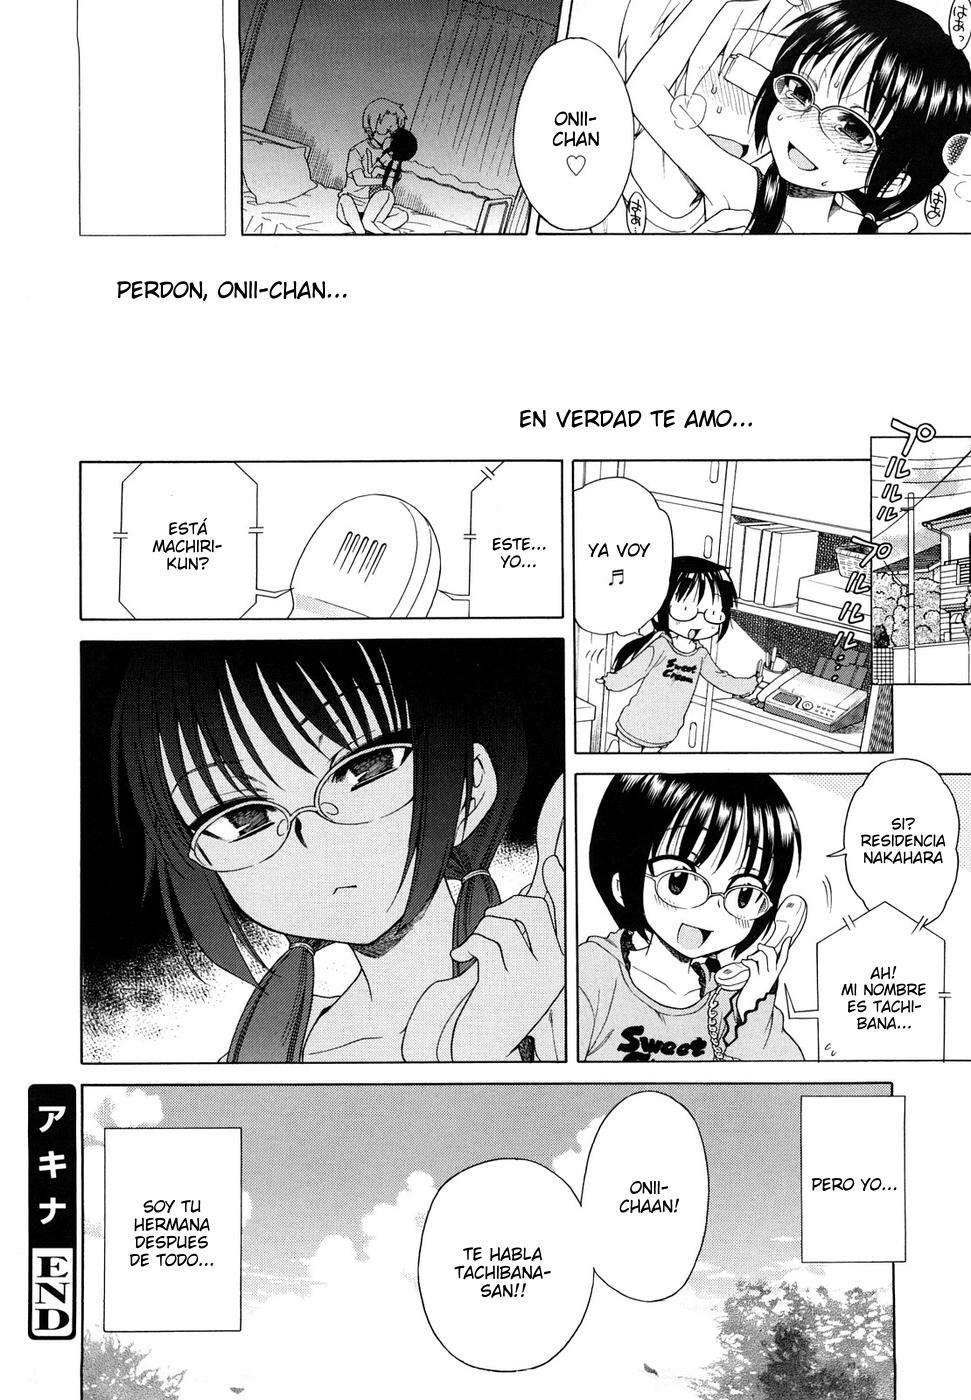 Onii-chan!! Me gustas.. Chapter-10 - 19